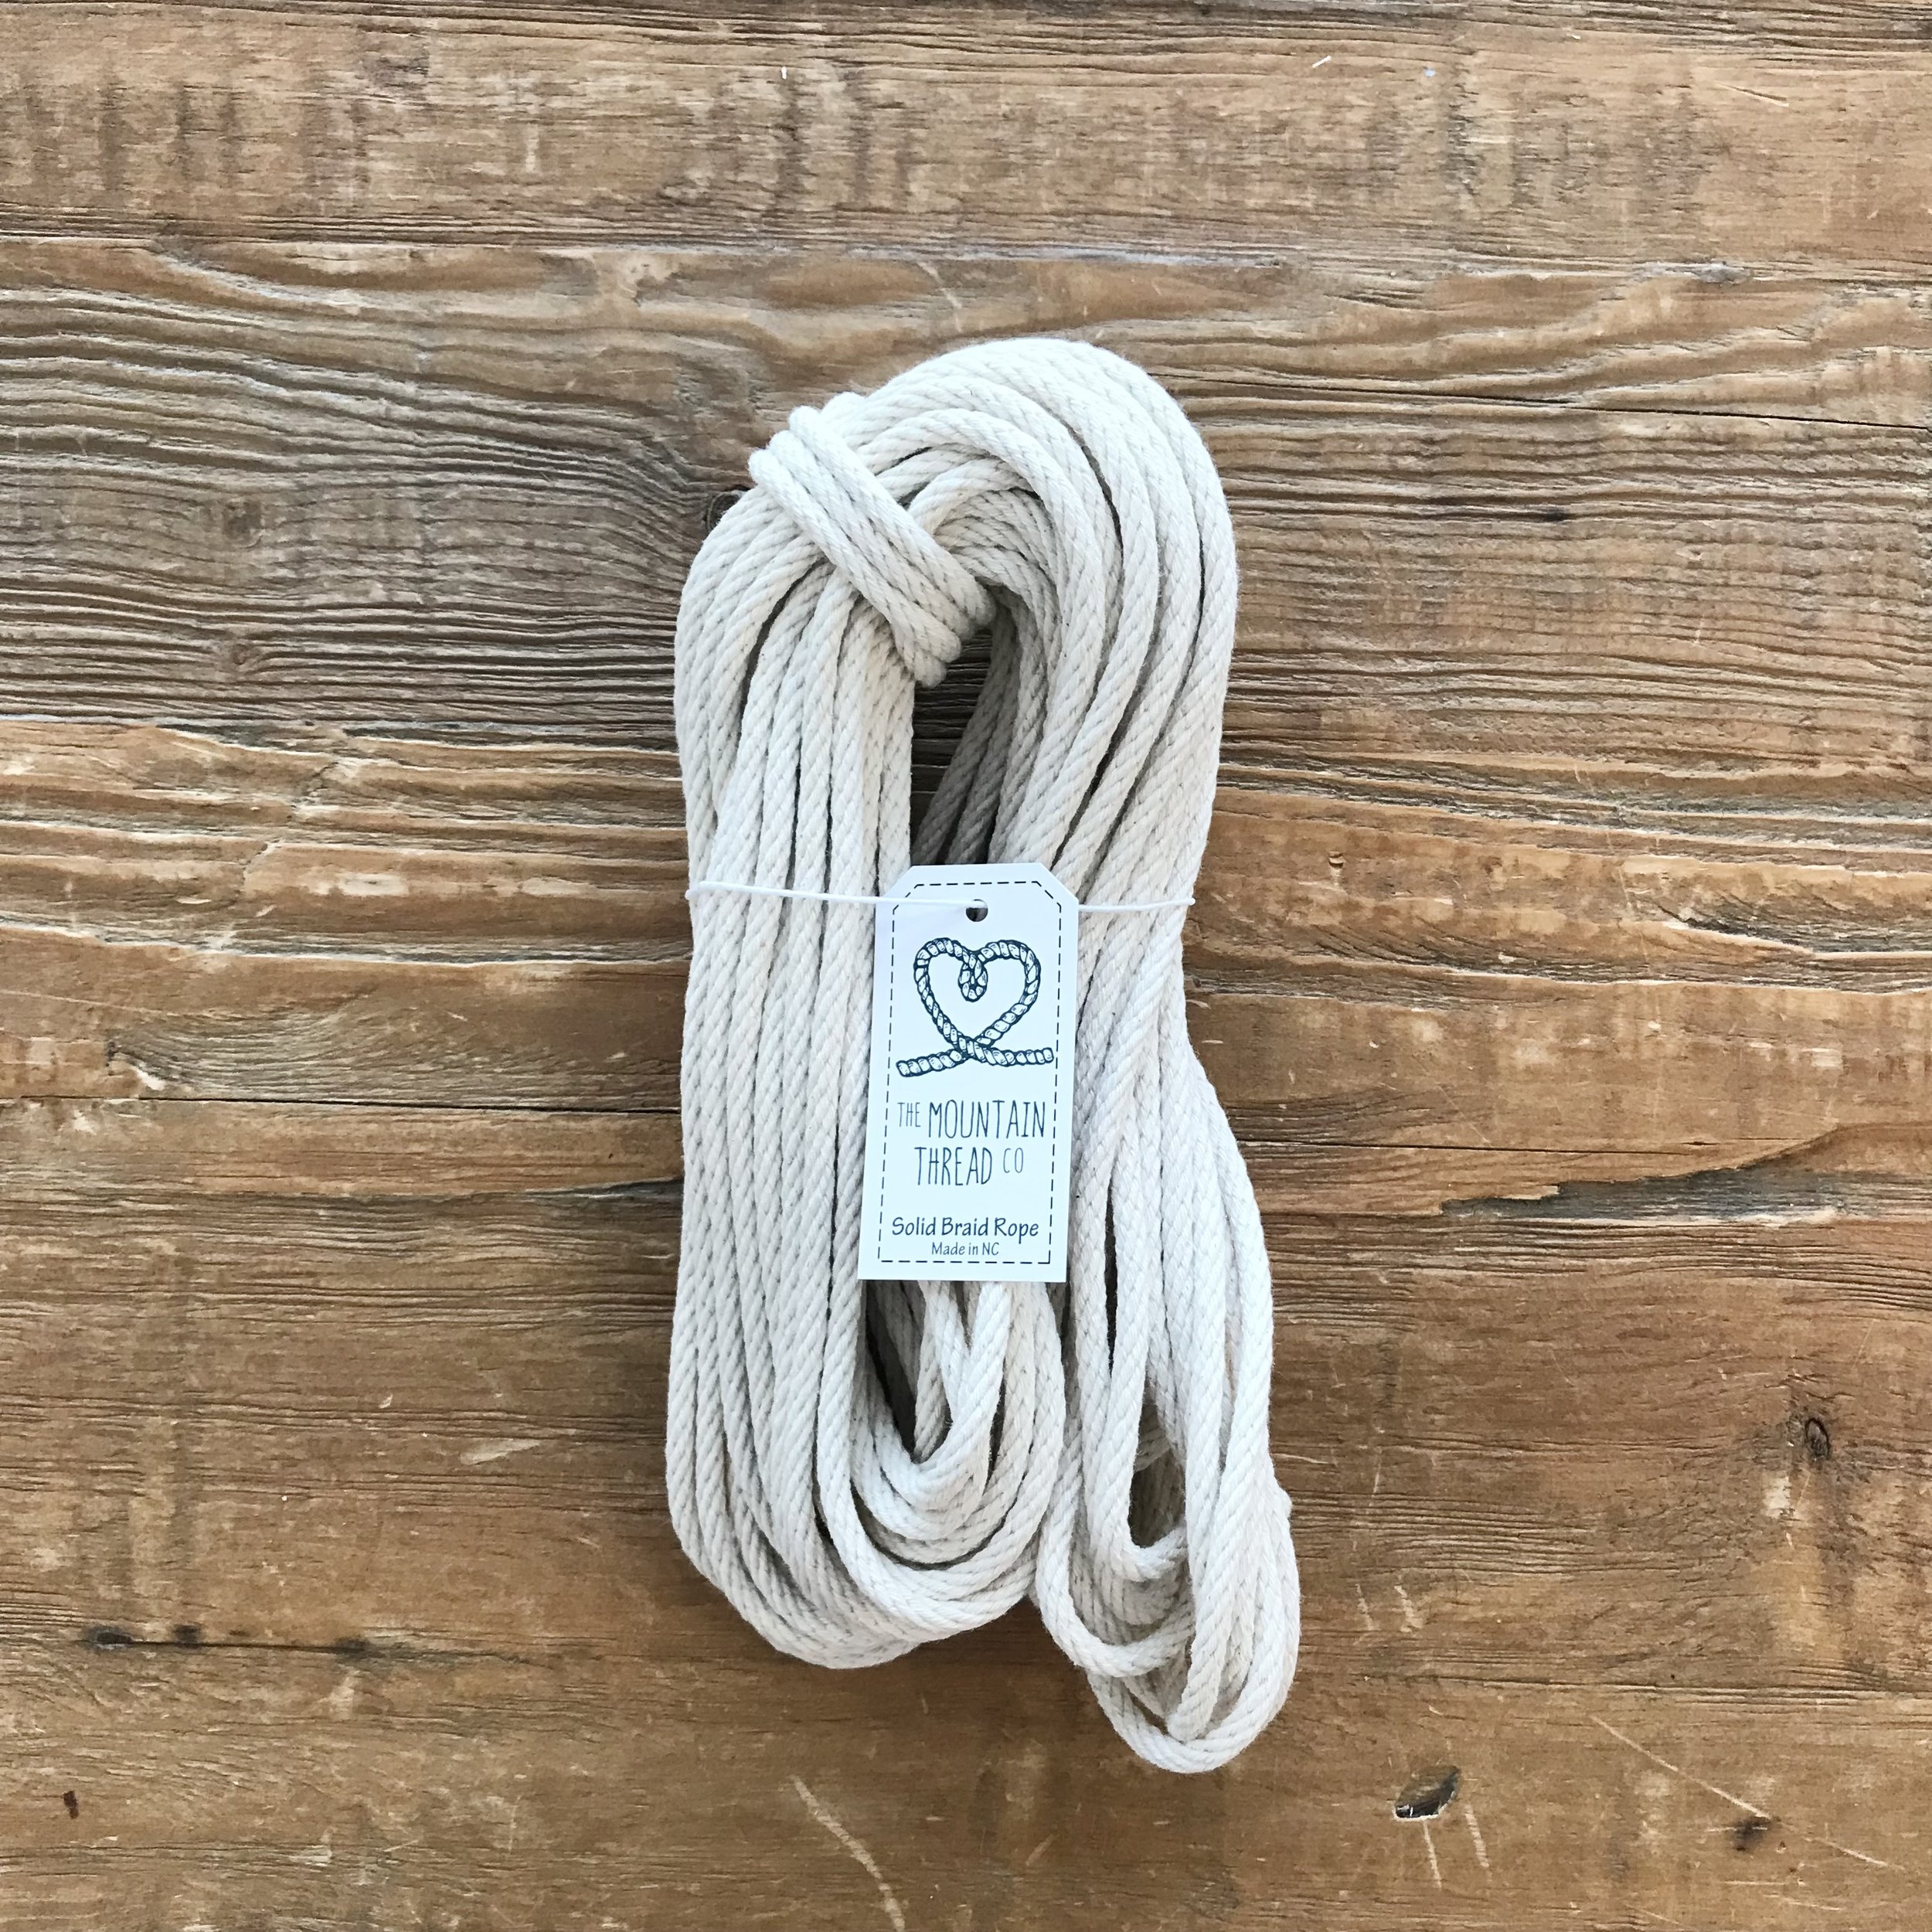 5/16 Cotton Rope By The Yard - 5 Yards - 100% Cotton Rope - Made